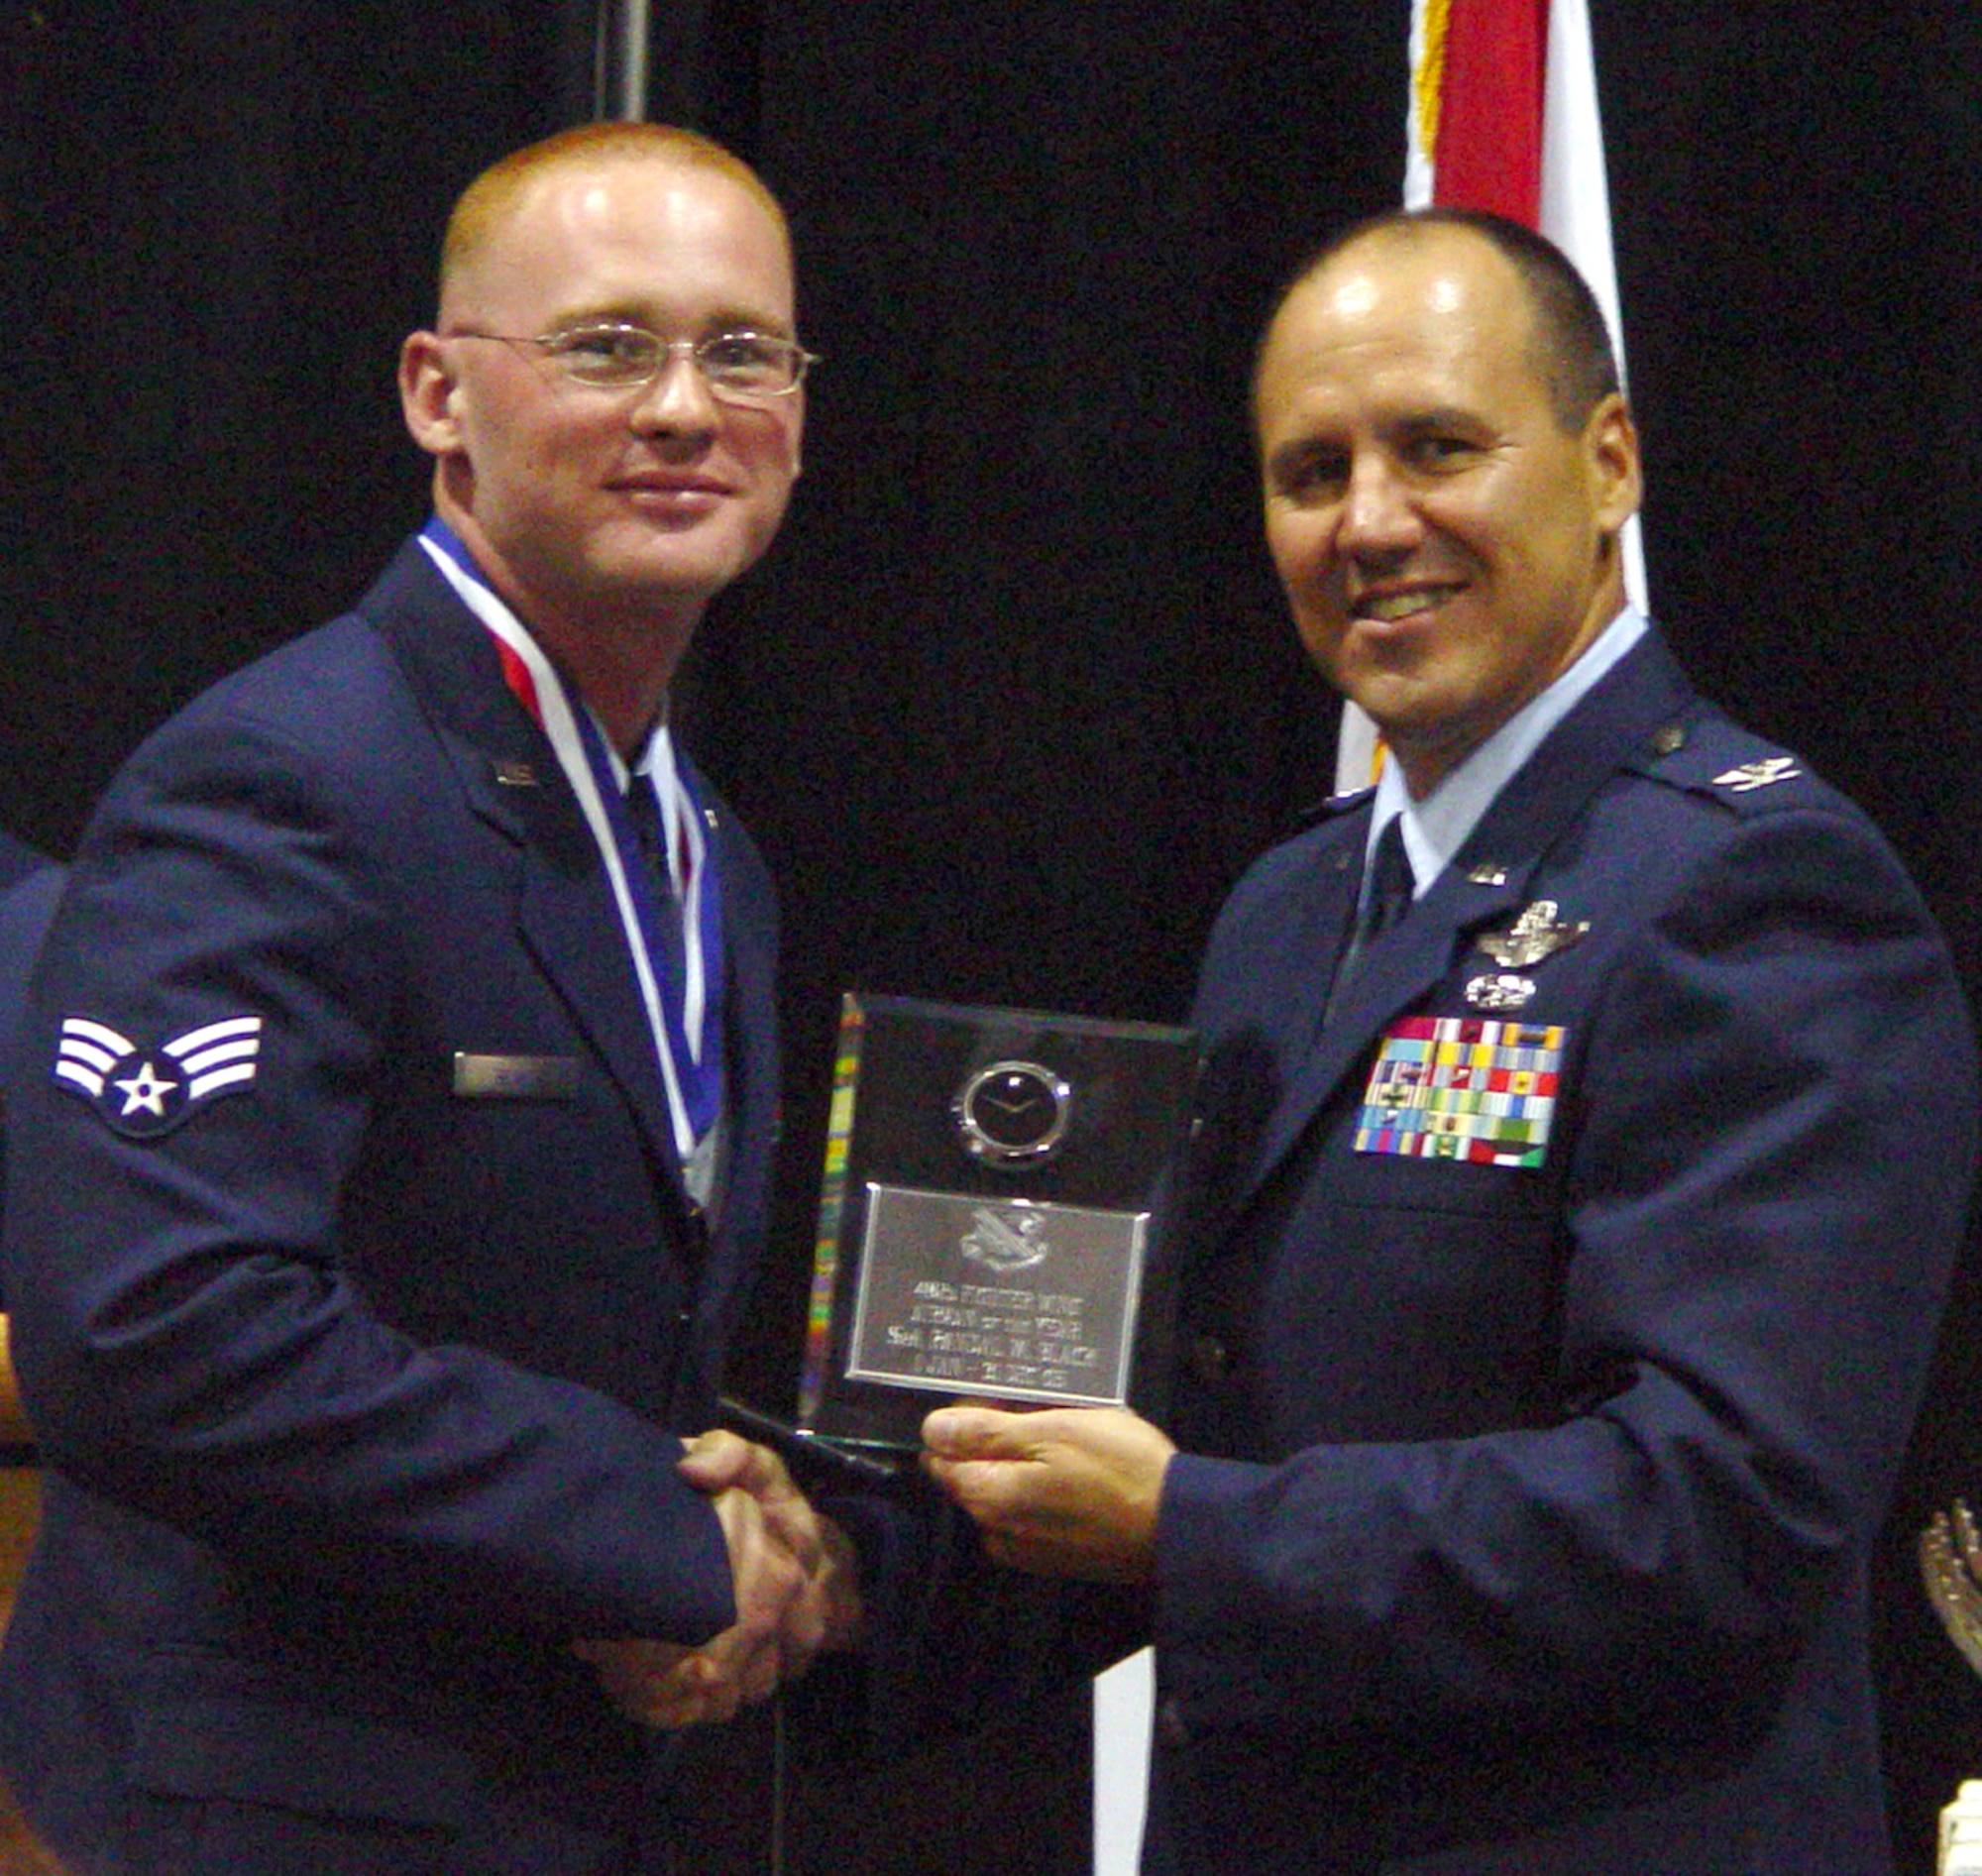 Senior Airman Randal Black, 482nd Fighter Wing Airman of the Year, receives an award from Col Randy Falcon, 482nd Fighter Wing Commander.  (Air Force photo by Lisa Macias)